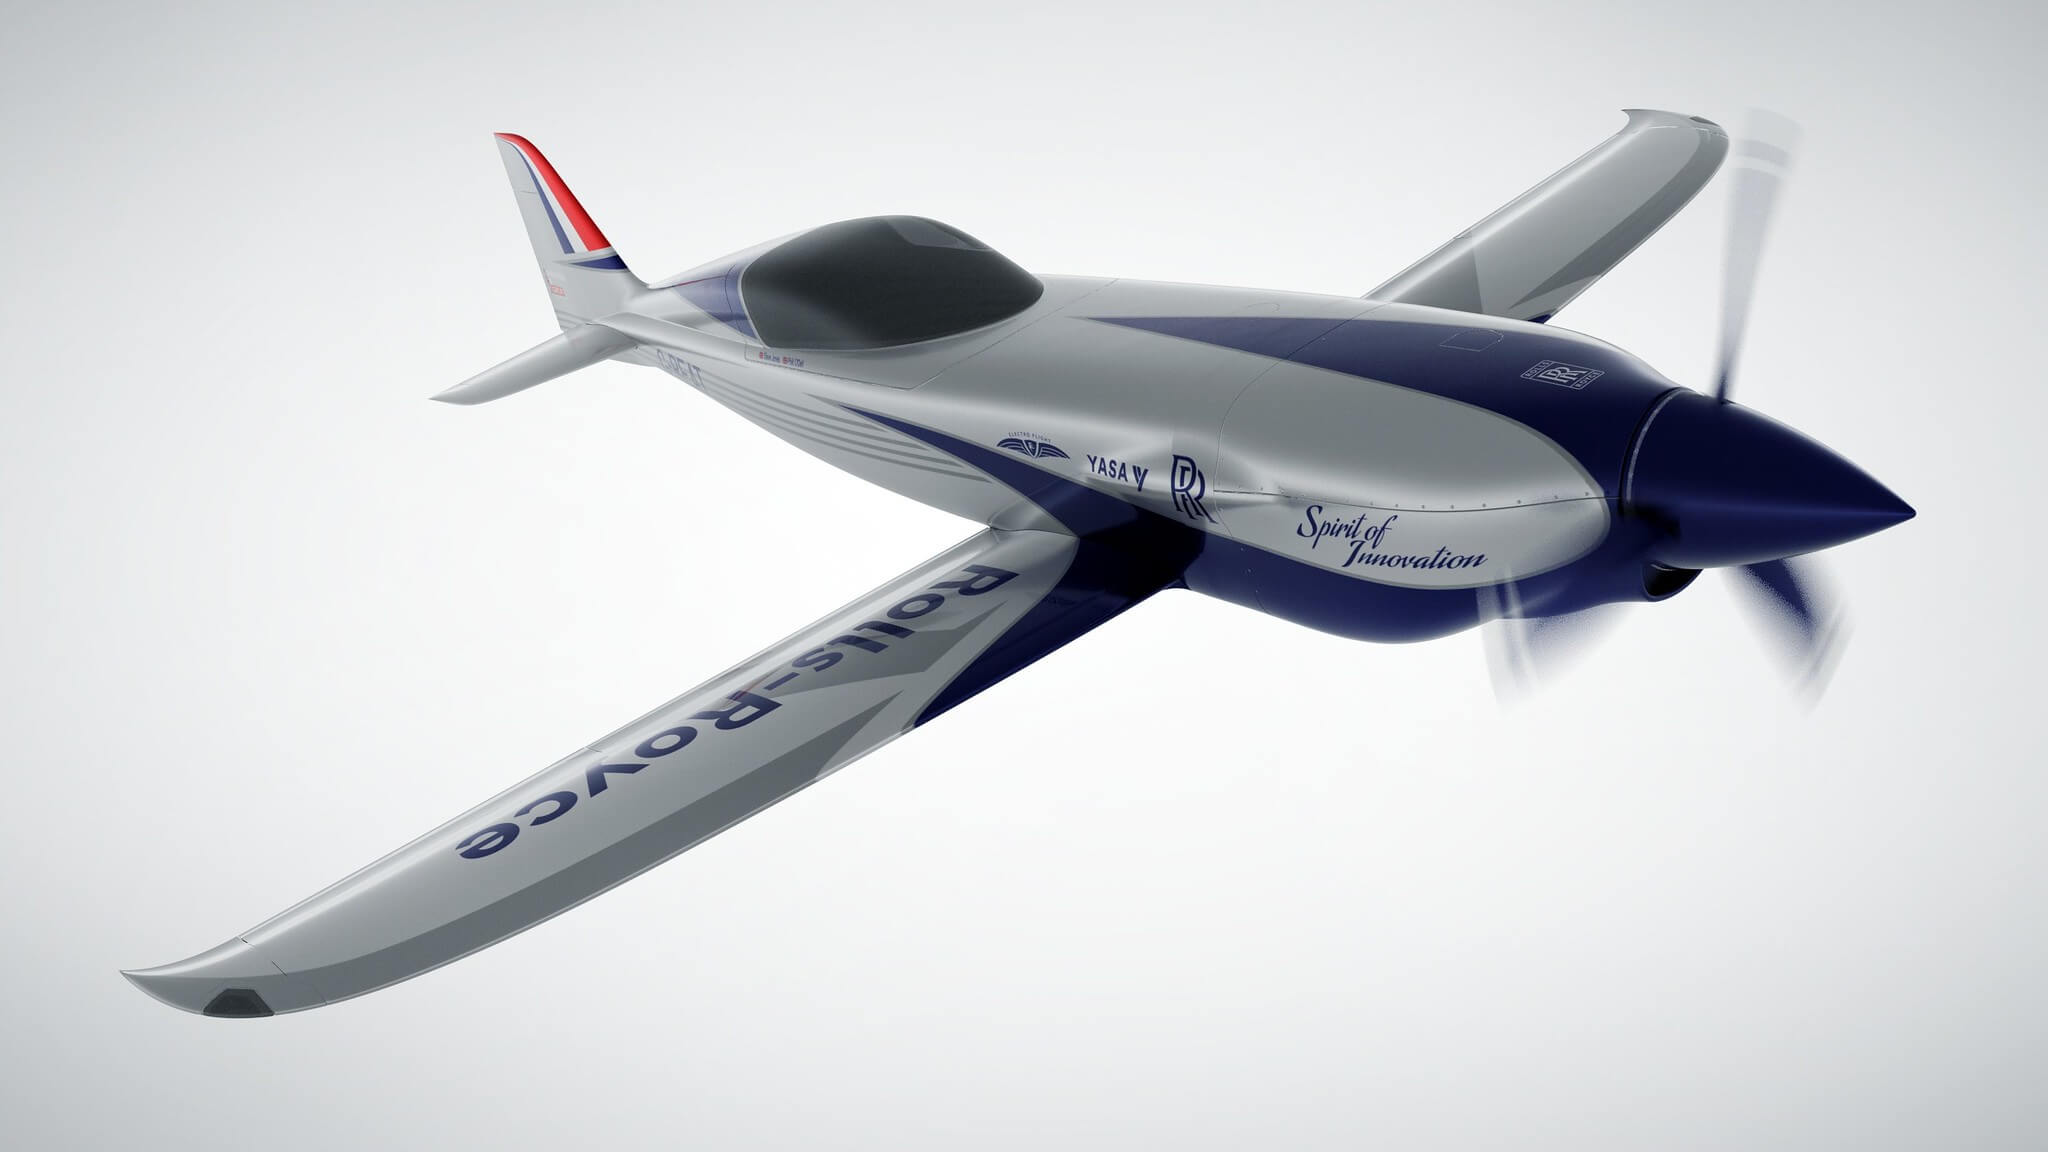 Rolls-Royce aims for the world's fastest all-electric plane under its ACCEL initiative